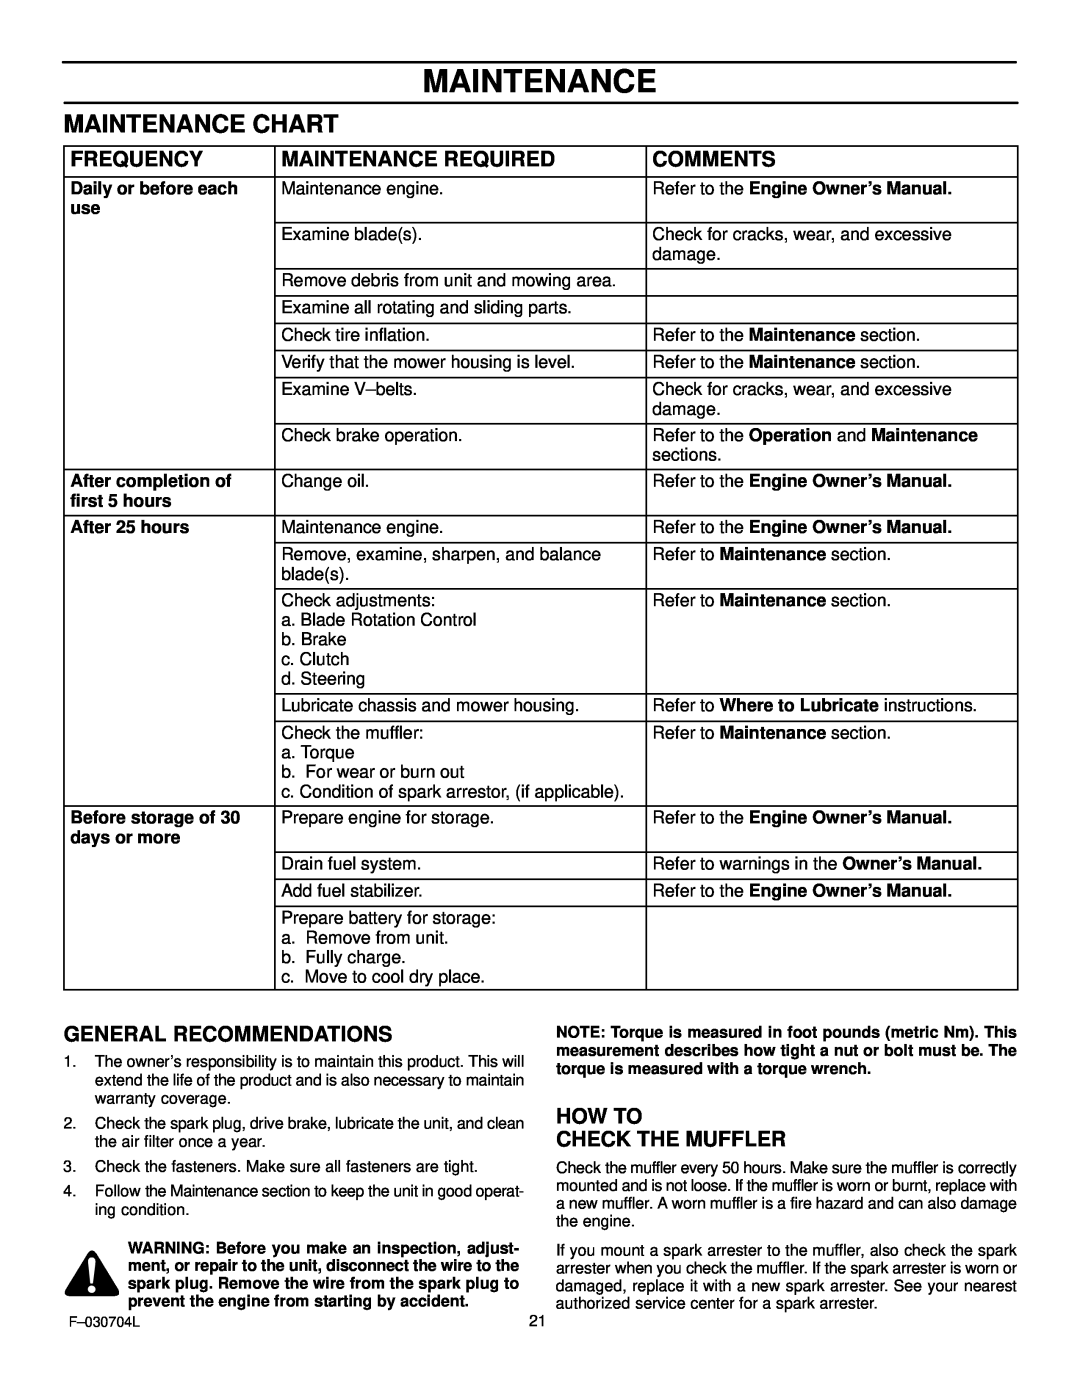 Murray 425303x92B manual Maintenance Chart, Frequency, Maintenance Required, Comments, General Recommendations 